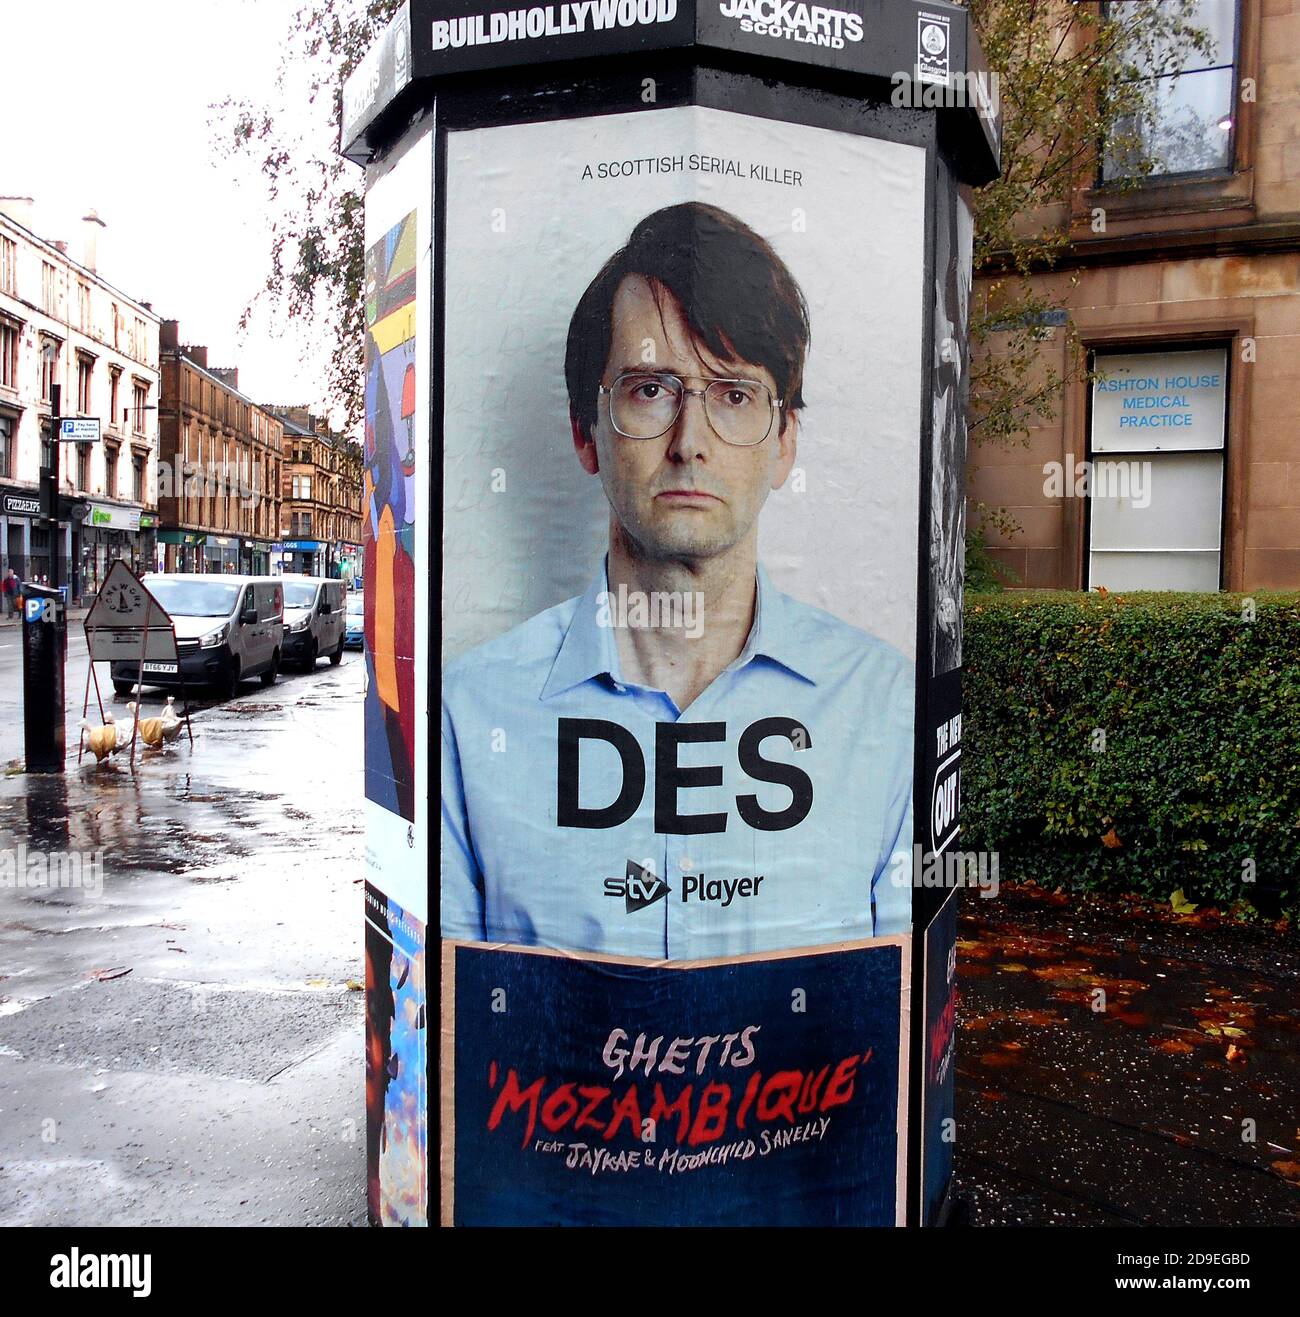 A picture of the Scottish actor, David Tennant, adorns an advertising pillar, in Glasgow, to promote a television program that he appeared in. Glasgow, October 2020.ALAN WYLIE/ALAMY© Stock Photo